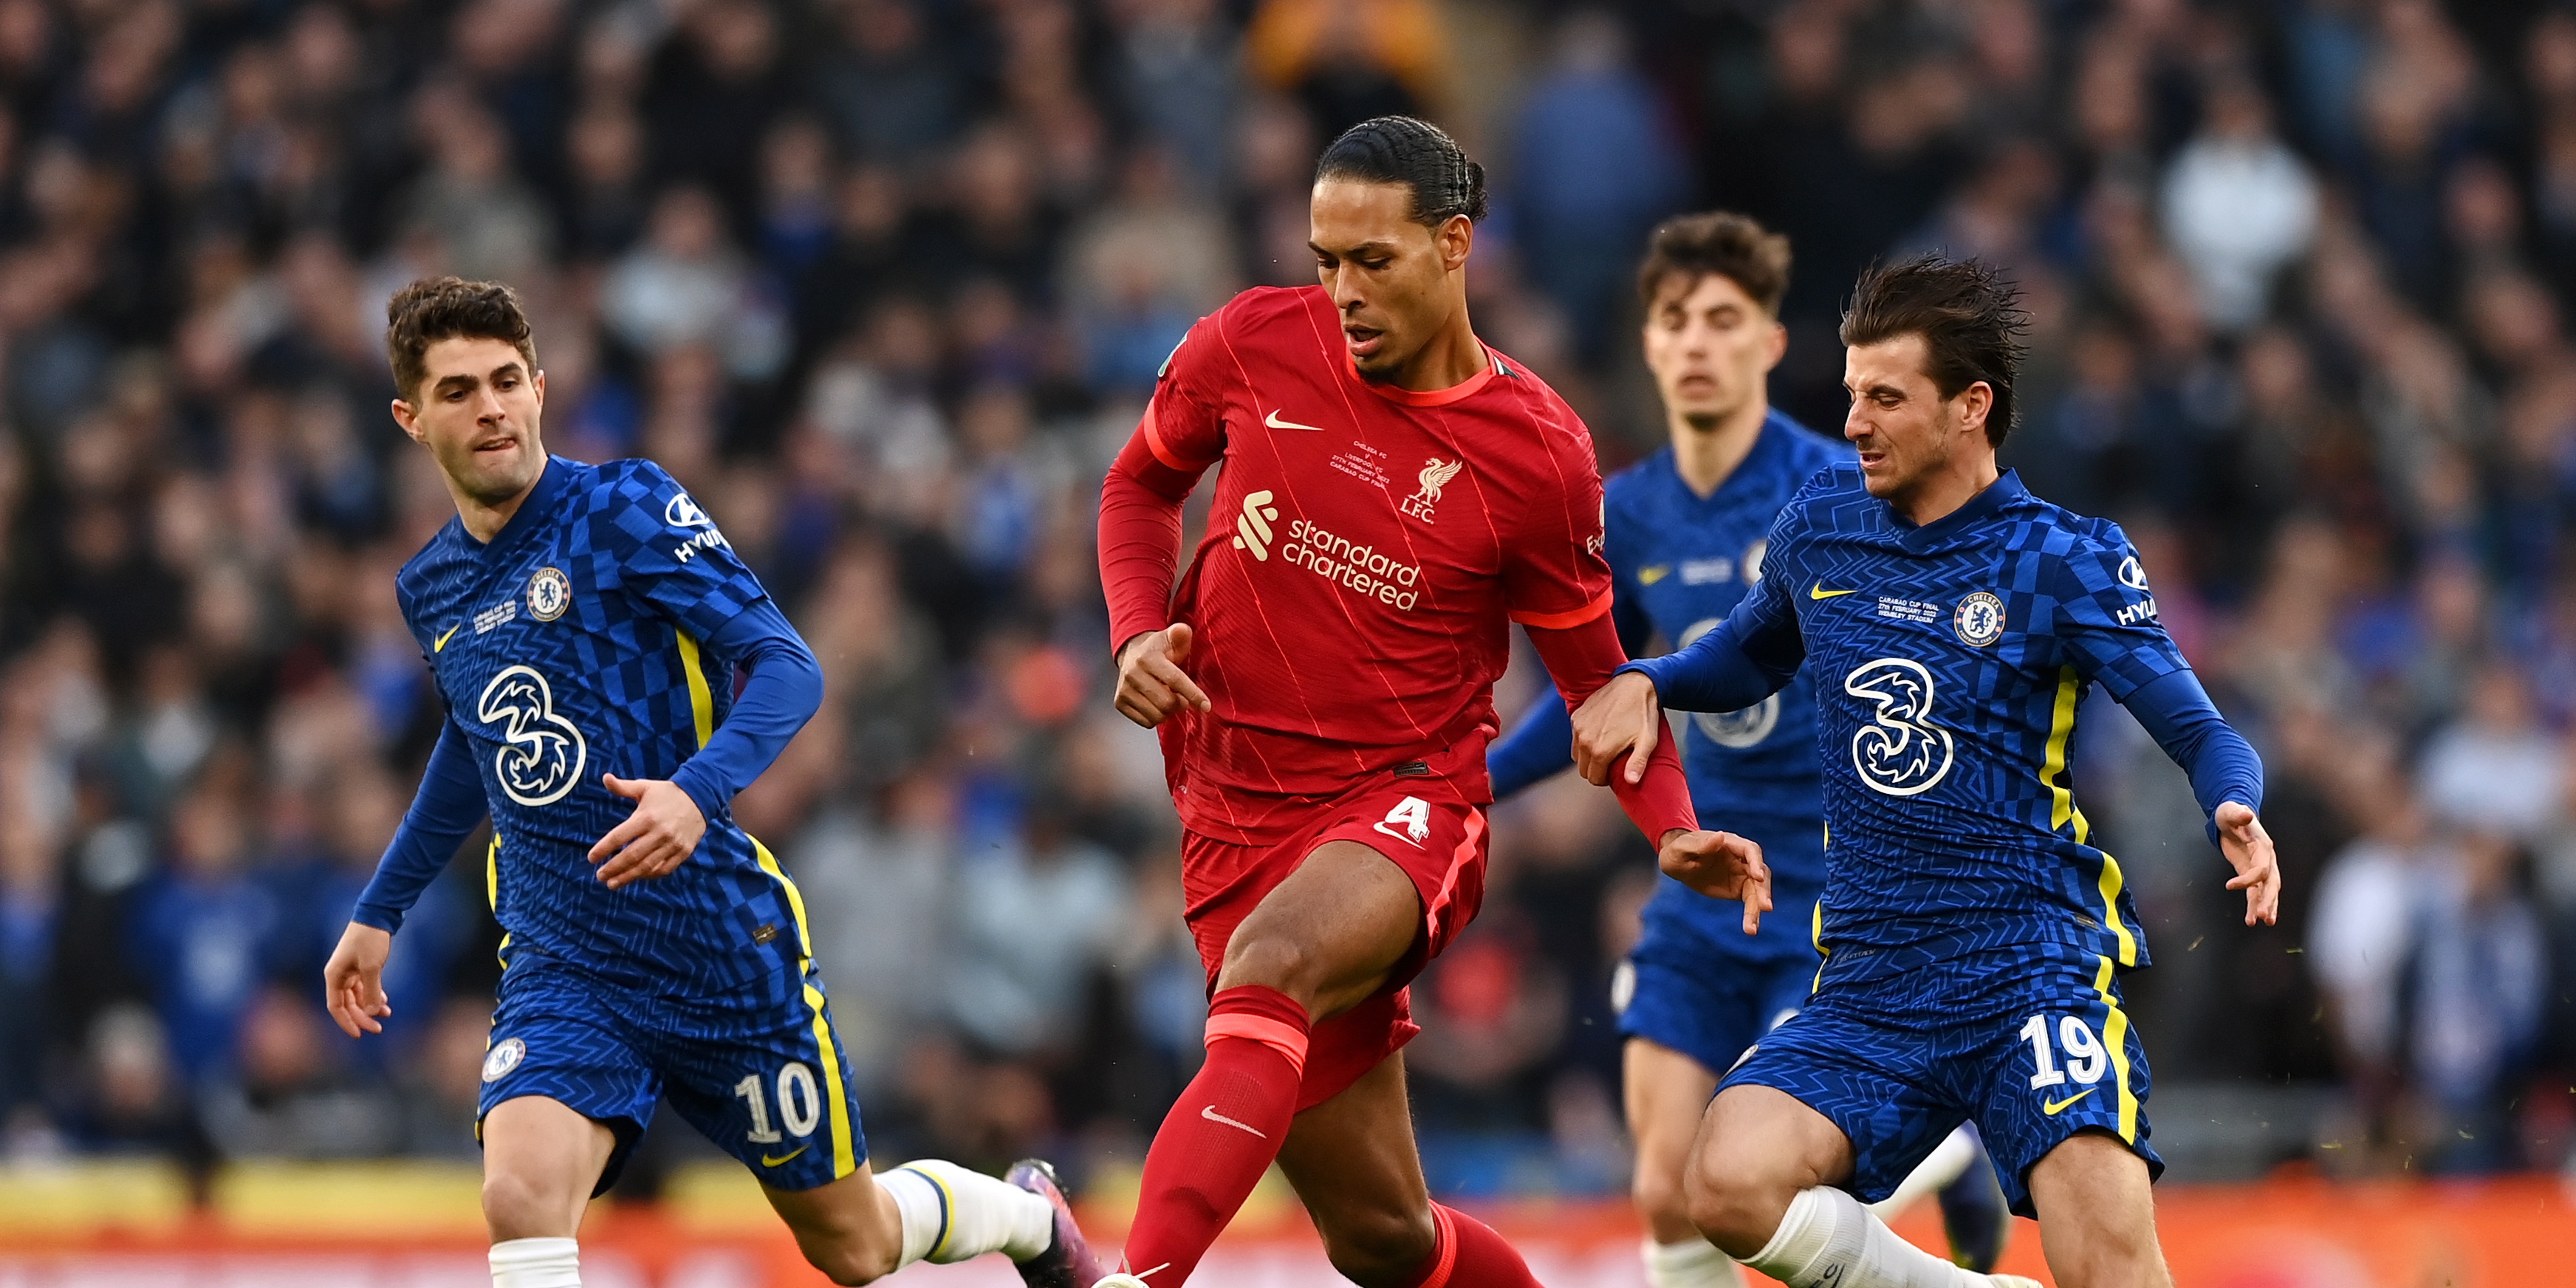 Two Chelsea stars missing key ingredient possessed by Liverpool duo, as ex-PL man shares Blues critique